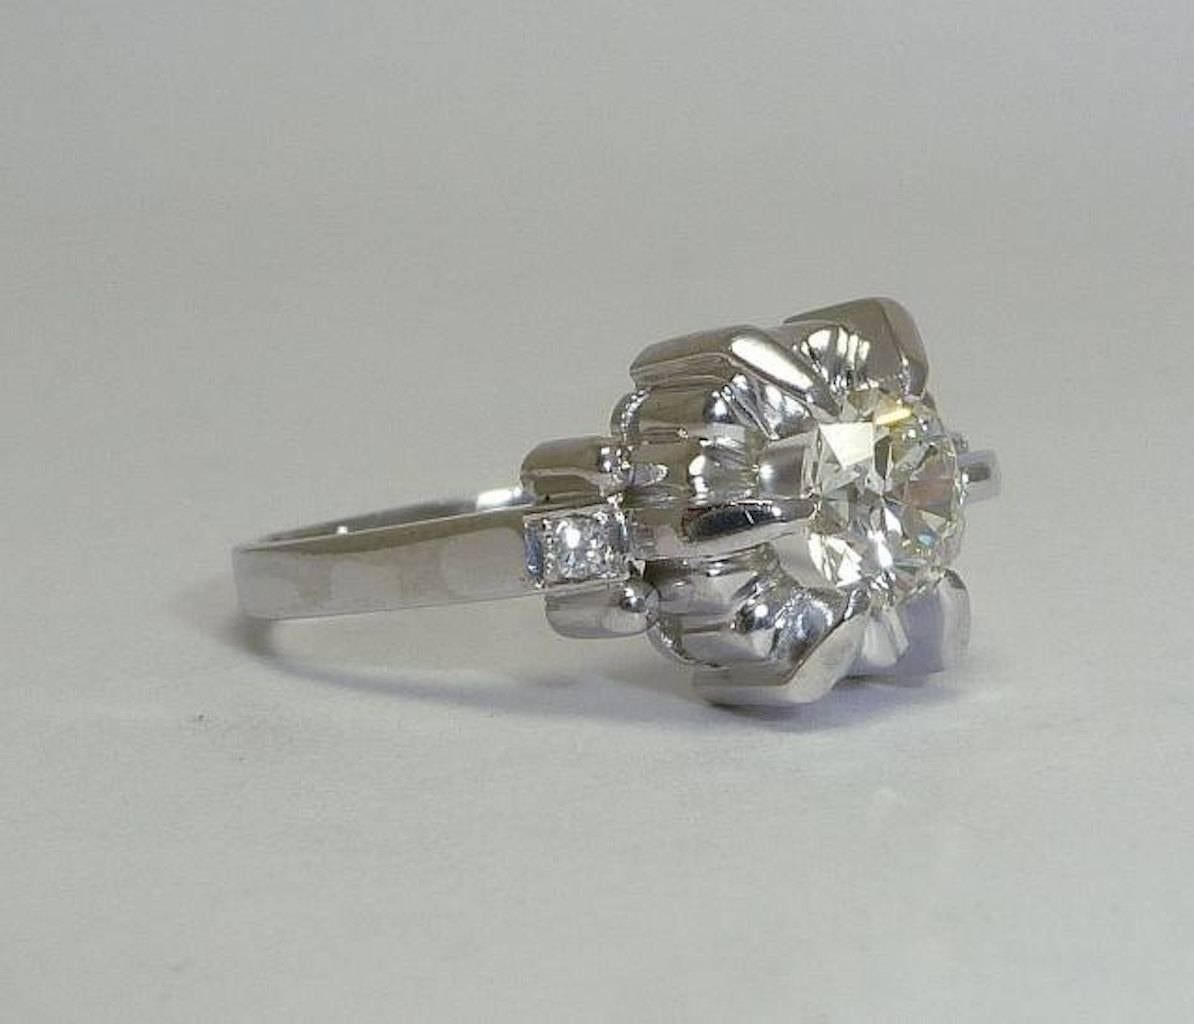 Beacon Hill Jewelers Presents:

A beautiful original art deco period diamond engagement ring in platinum from France. Hand crafted, this sleek art deco ring features a center 0.70 carat old European cut diamond set in a traditional flower style